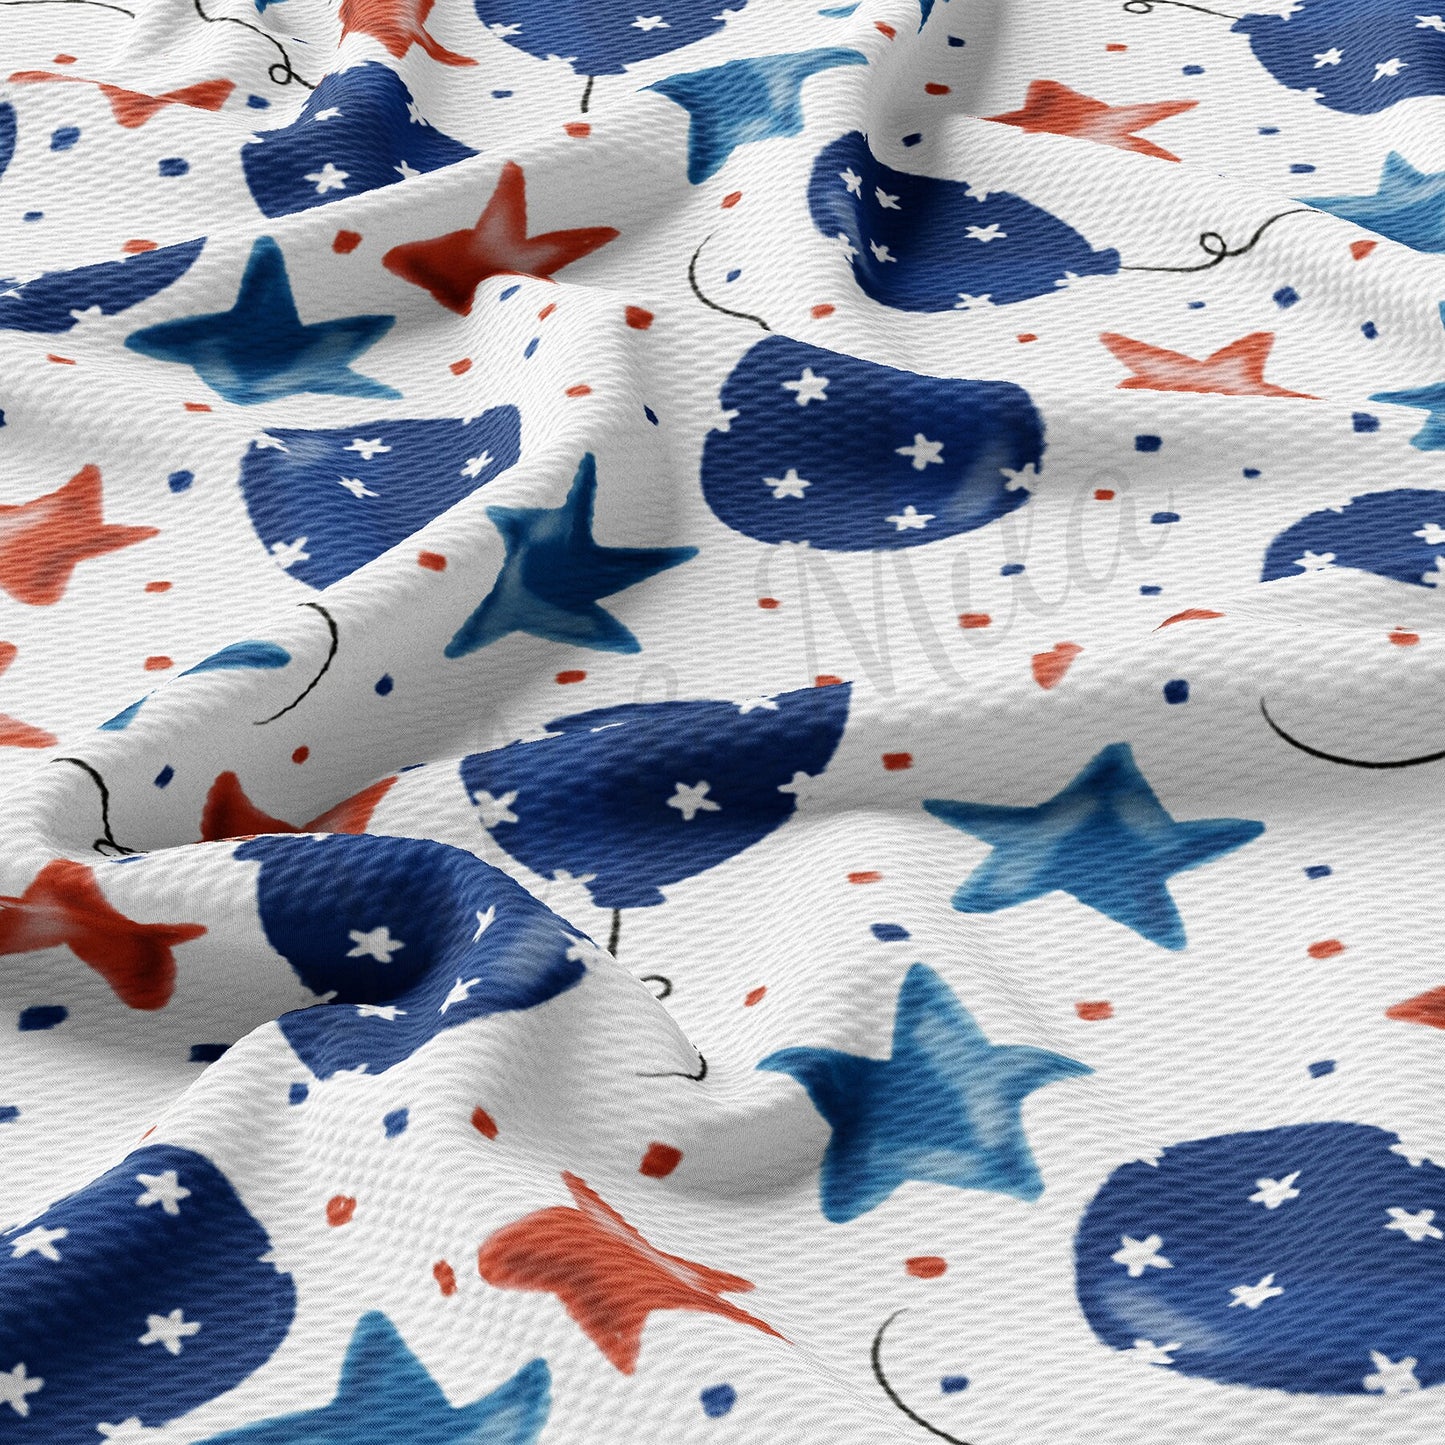 Patriotic 4th of July  Bullet Textured   Fabric AA1719